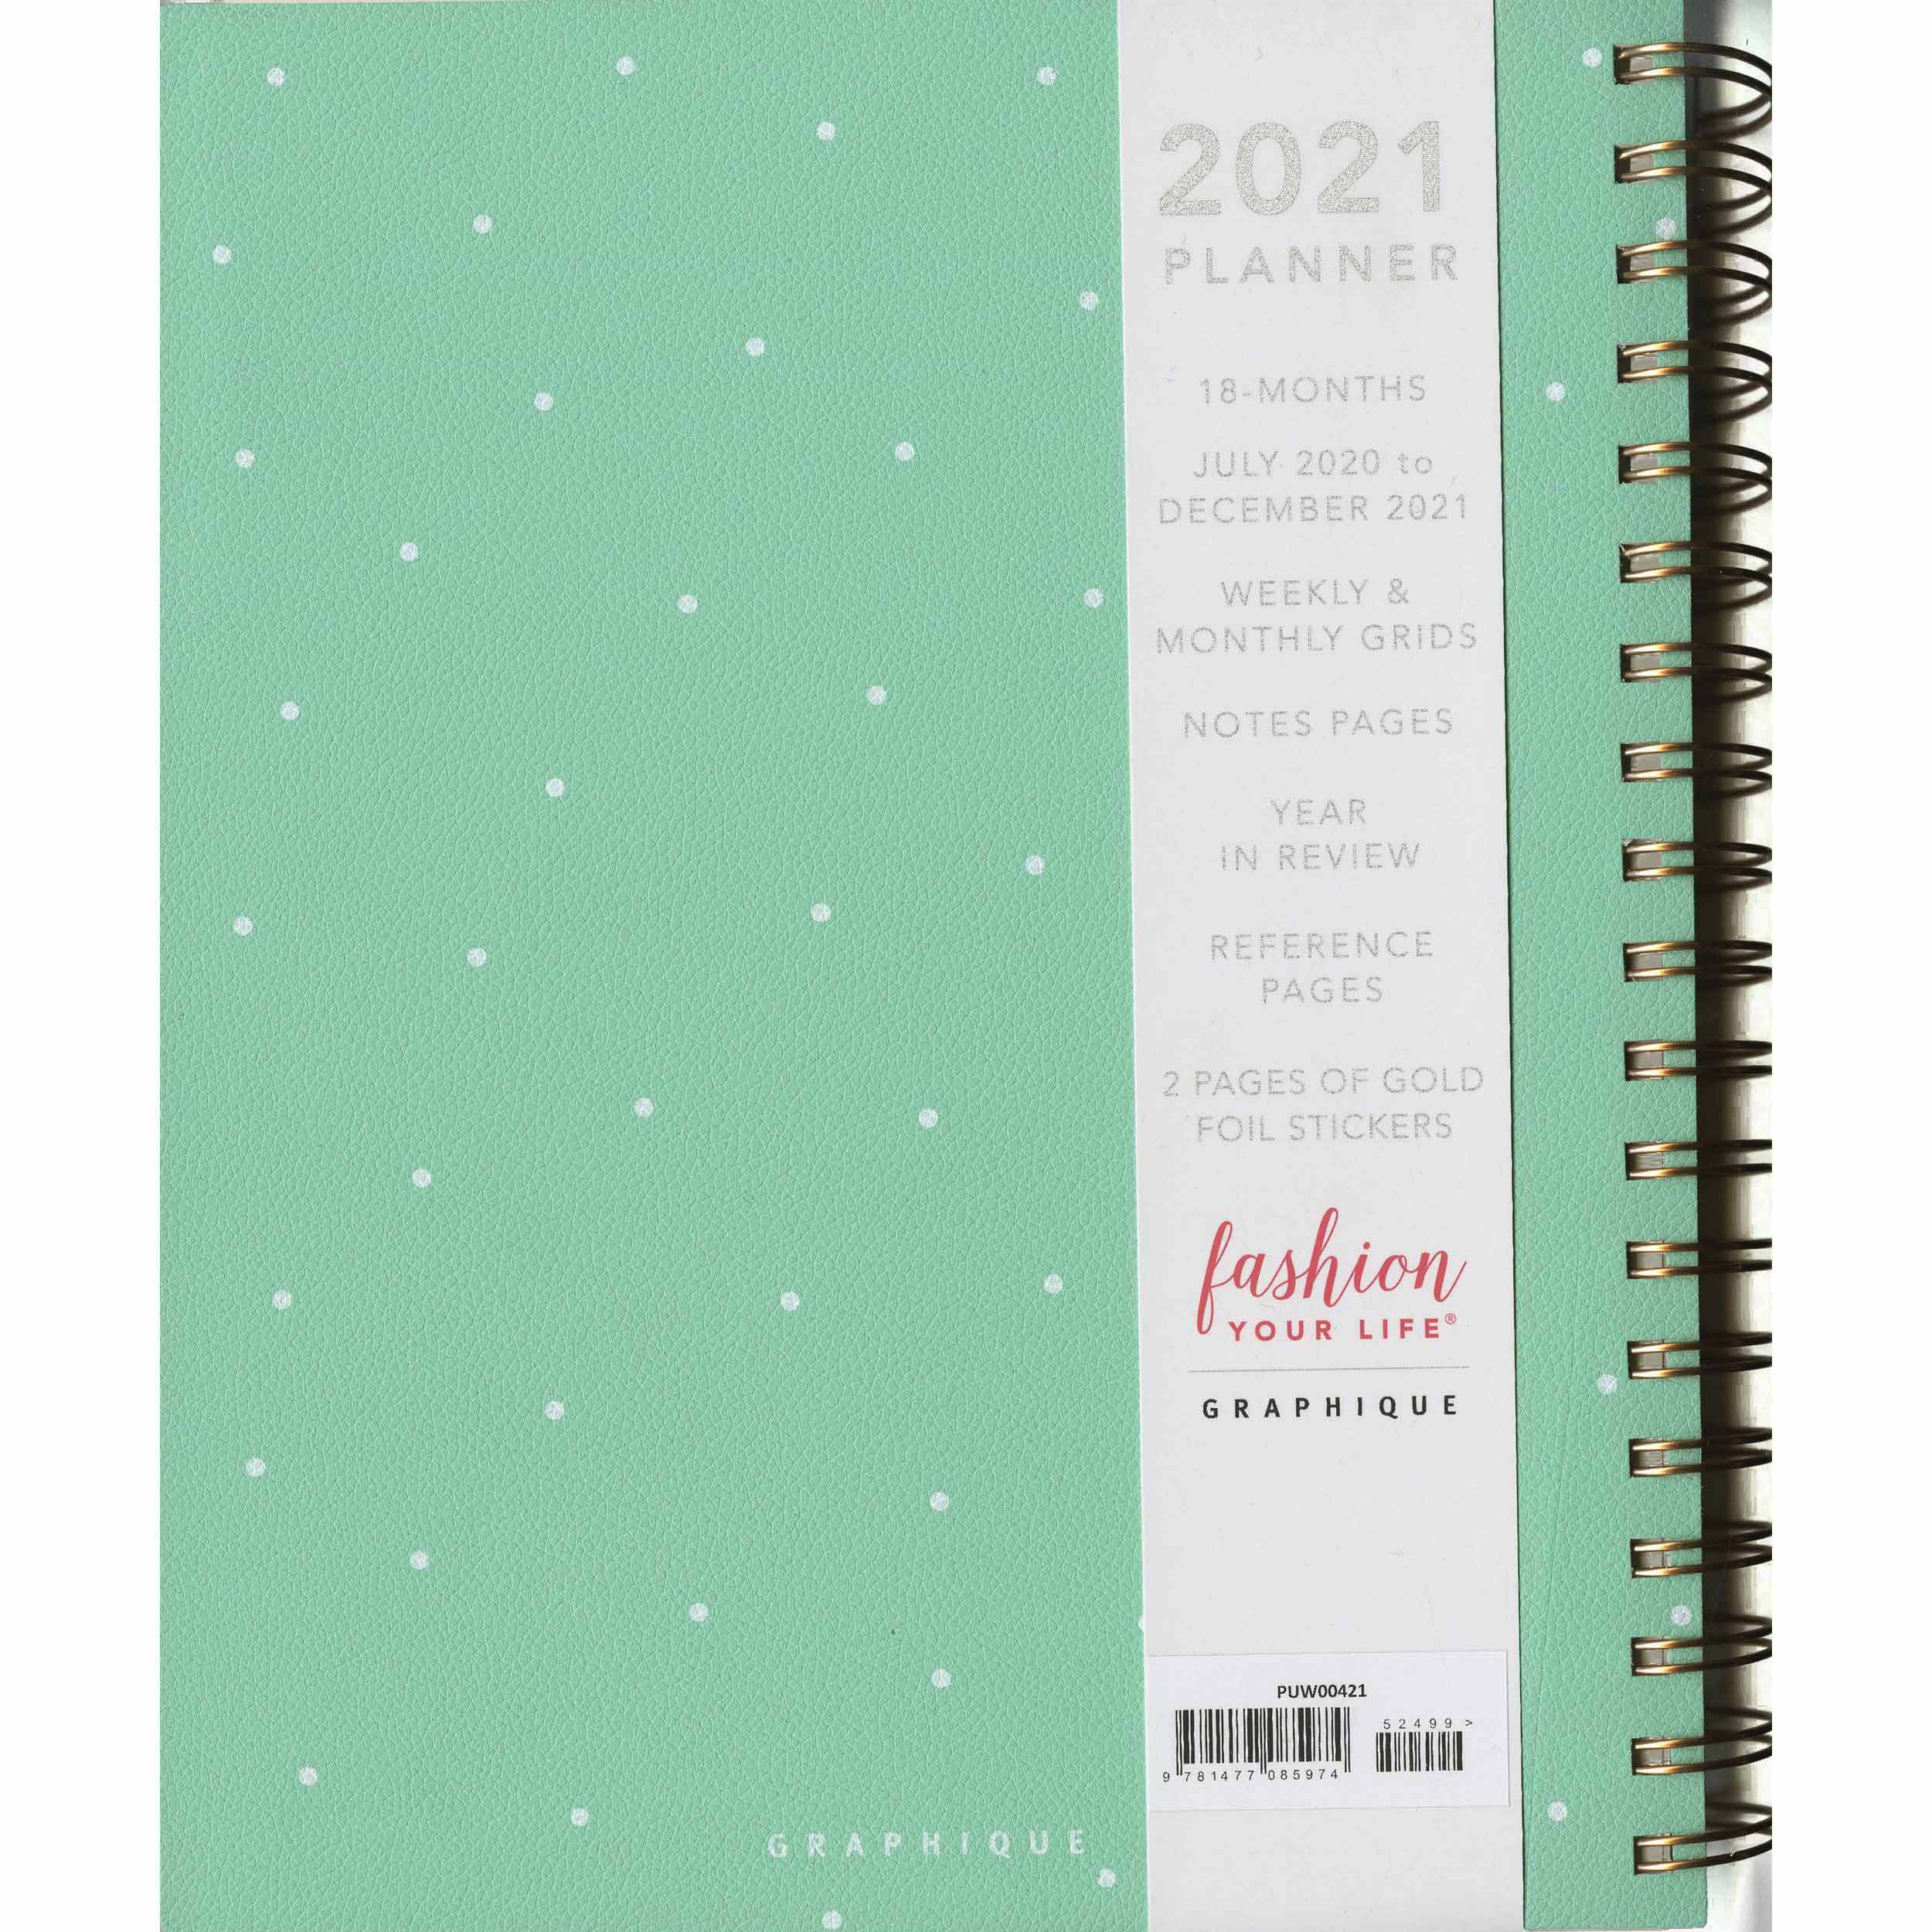 Make The Days Count Deluxe Diary 2021 At Calendar Club